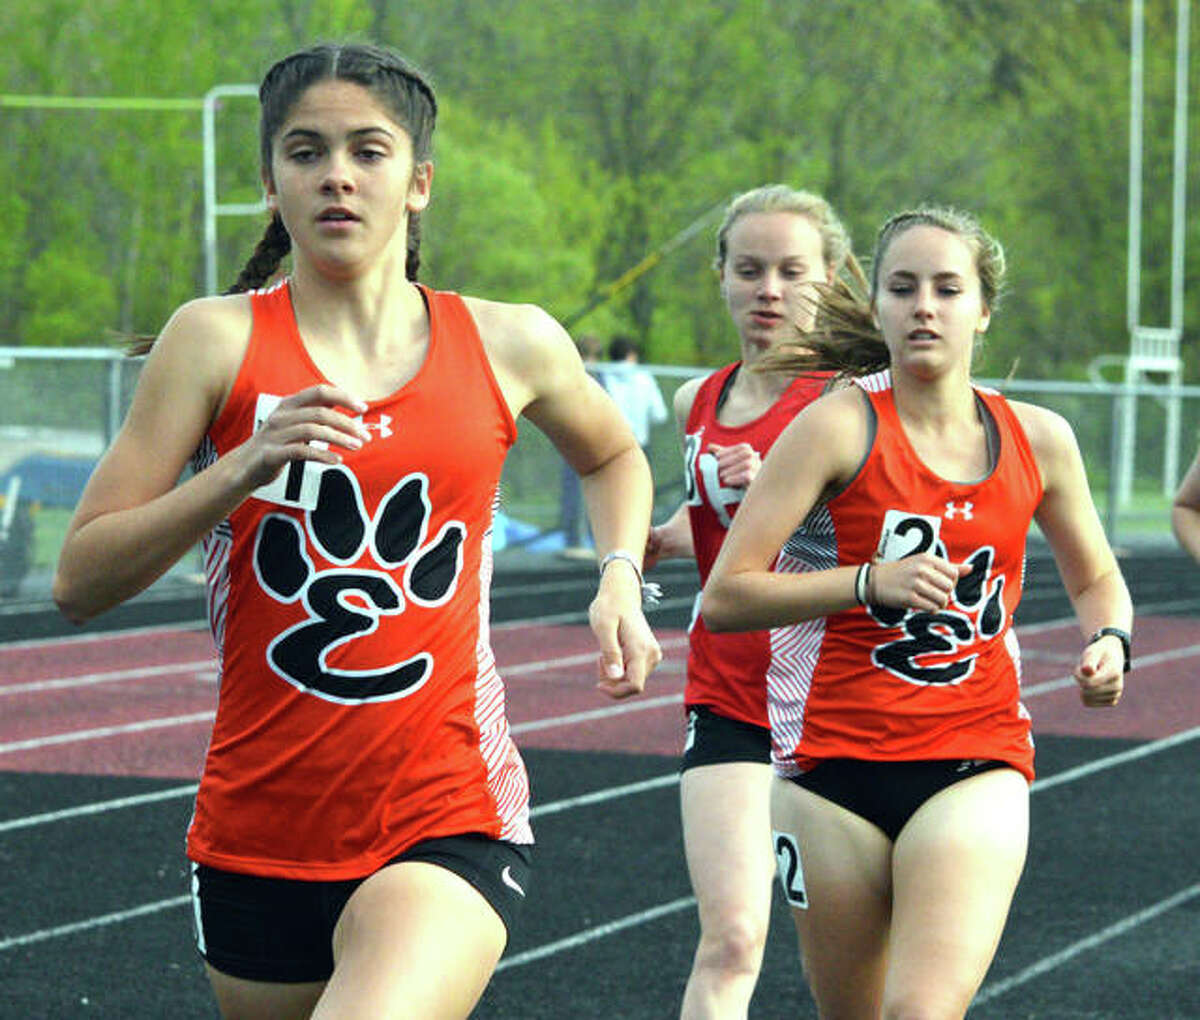 Edwardsville’s Abby Korak runs in front of the pack, including teammate Hannah Stuart, on Tuesday in the Madison County Meet in Troy.